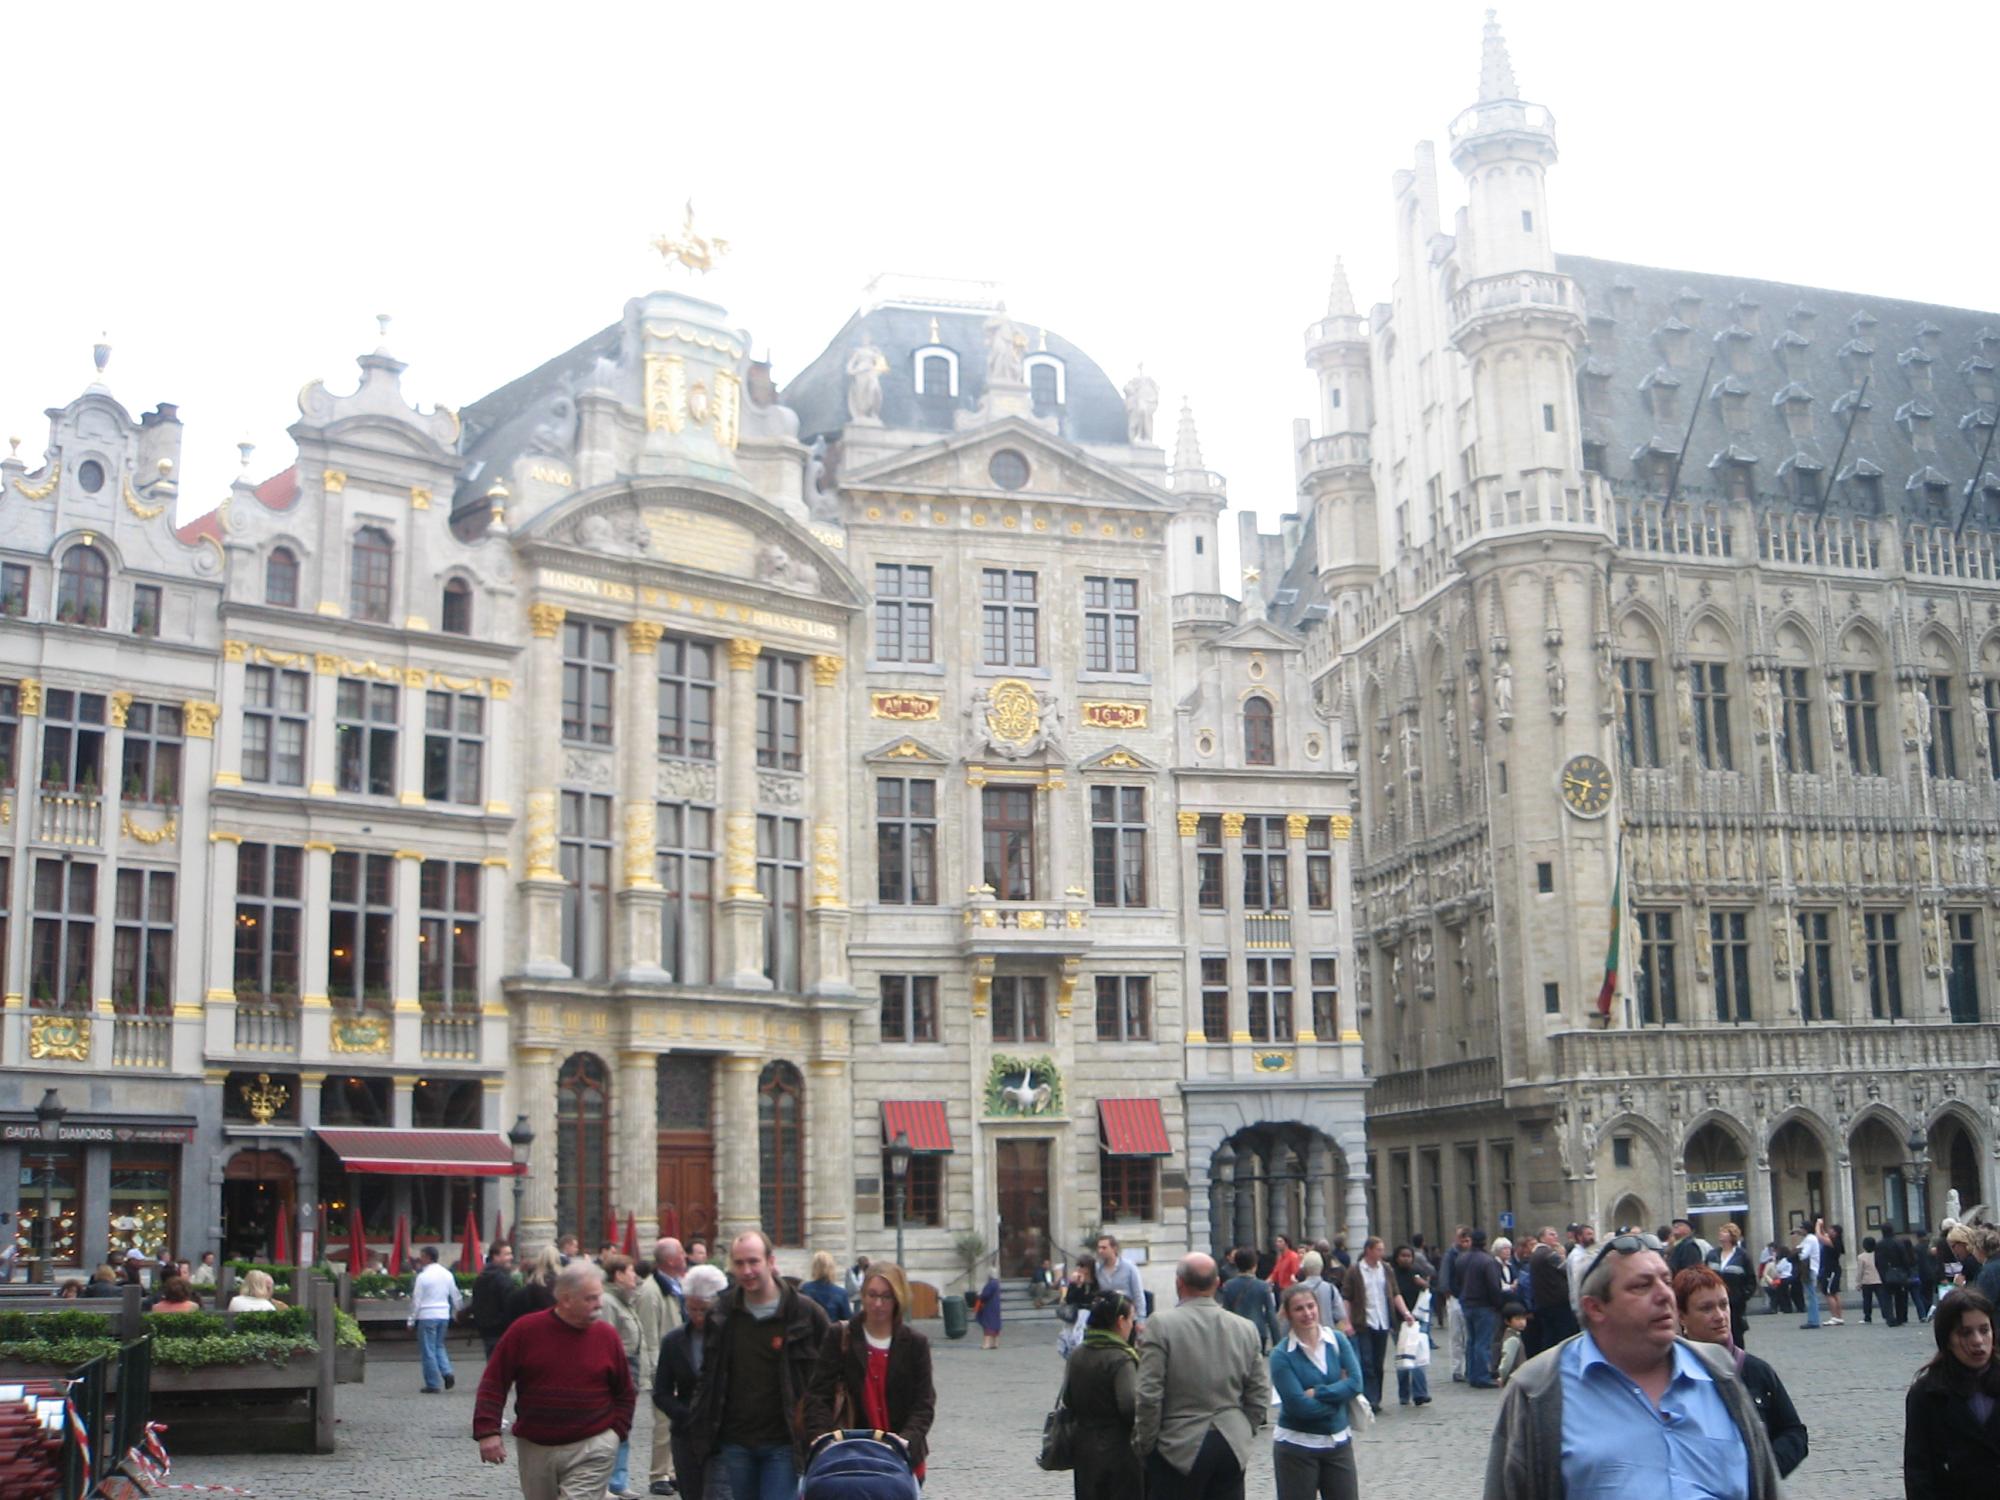 Brussels (2008-2009) - Grand Place #1